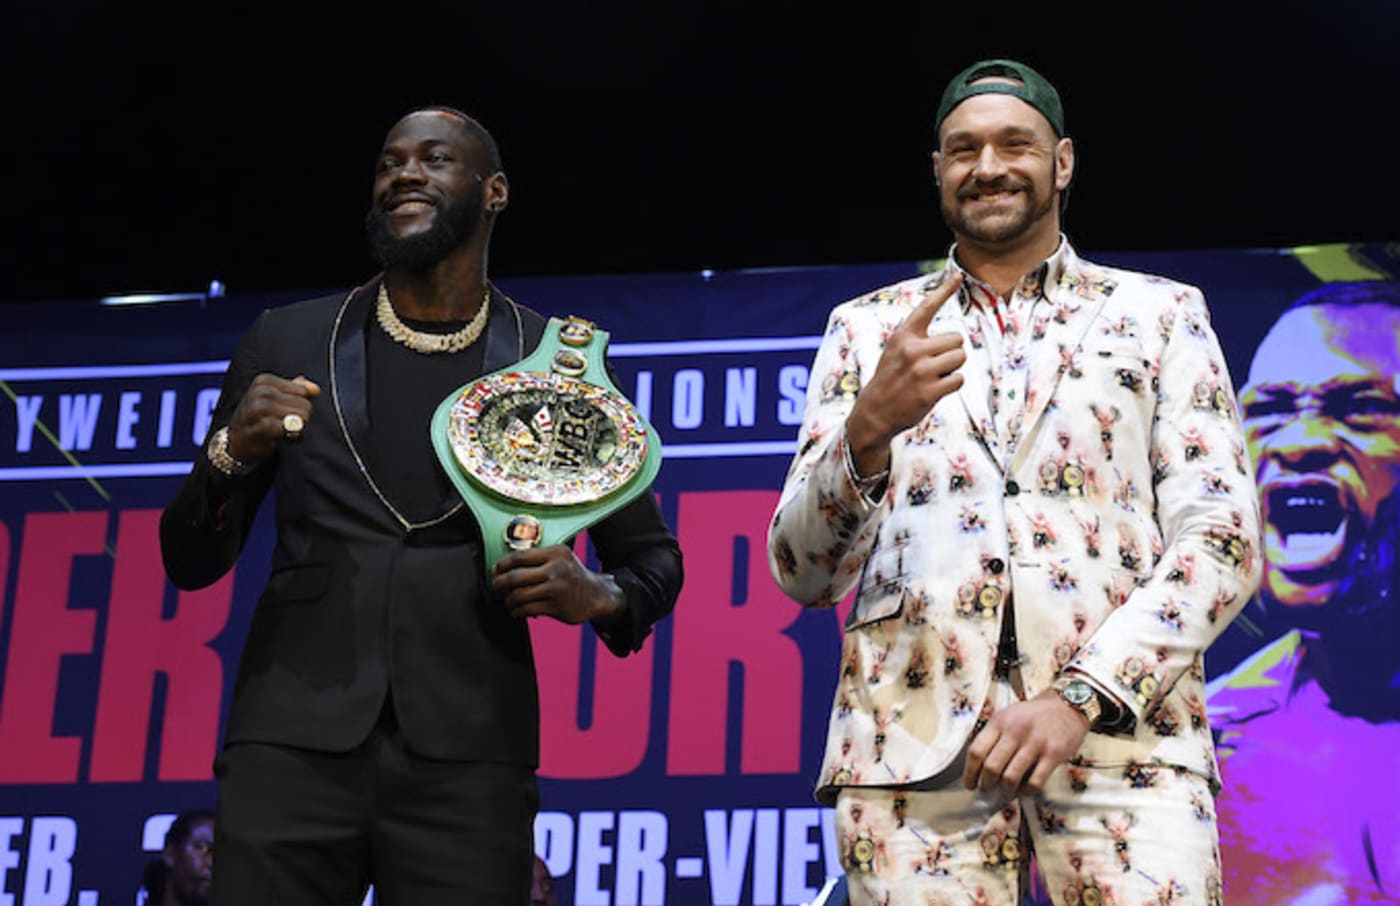 Deontay Wilder and Tyson Fury get together during a news conference at The Novo Theater.